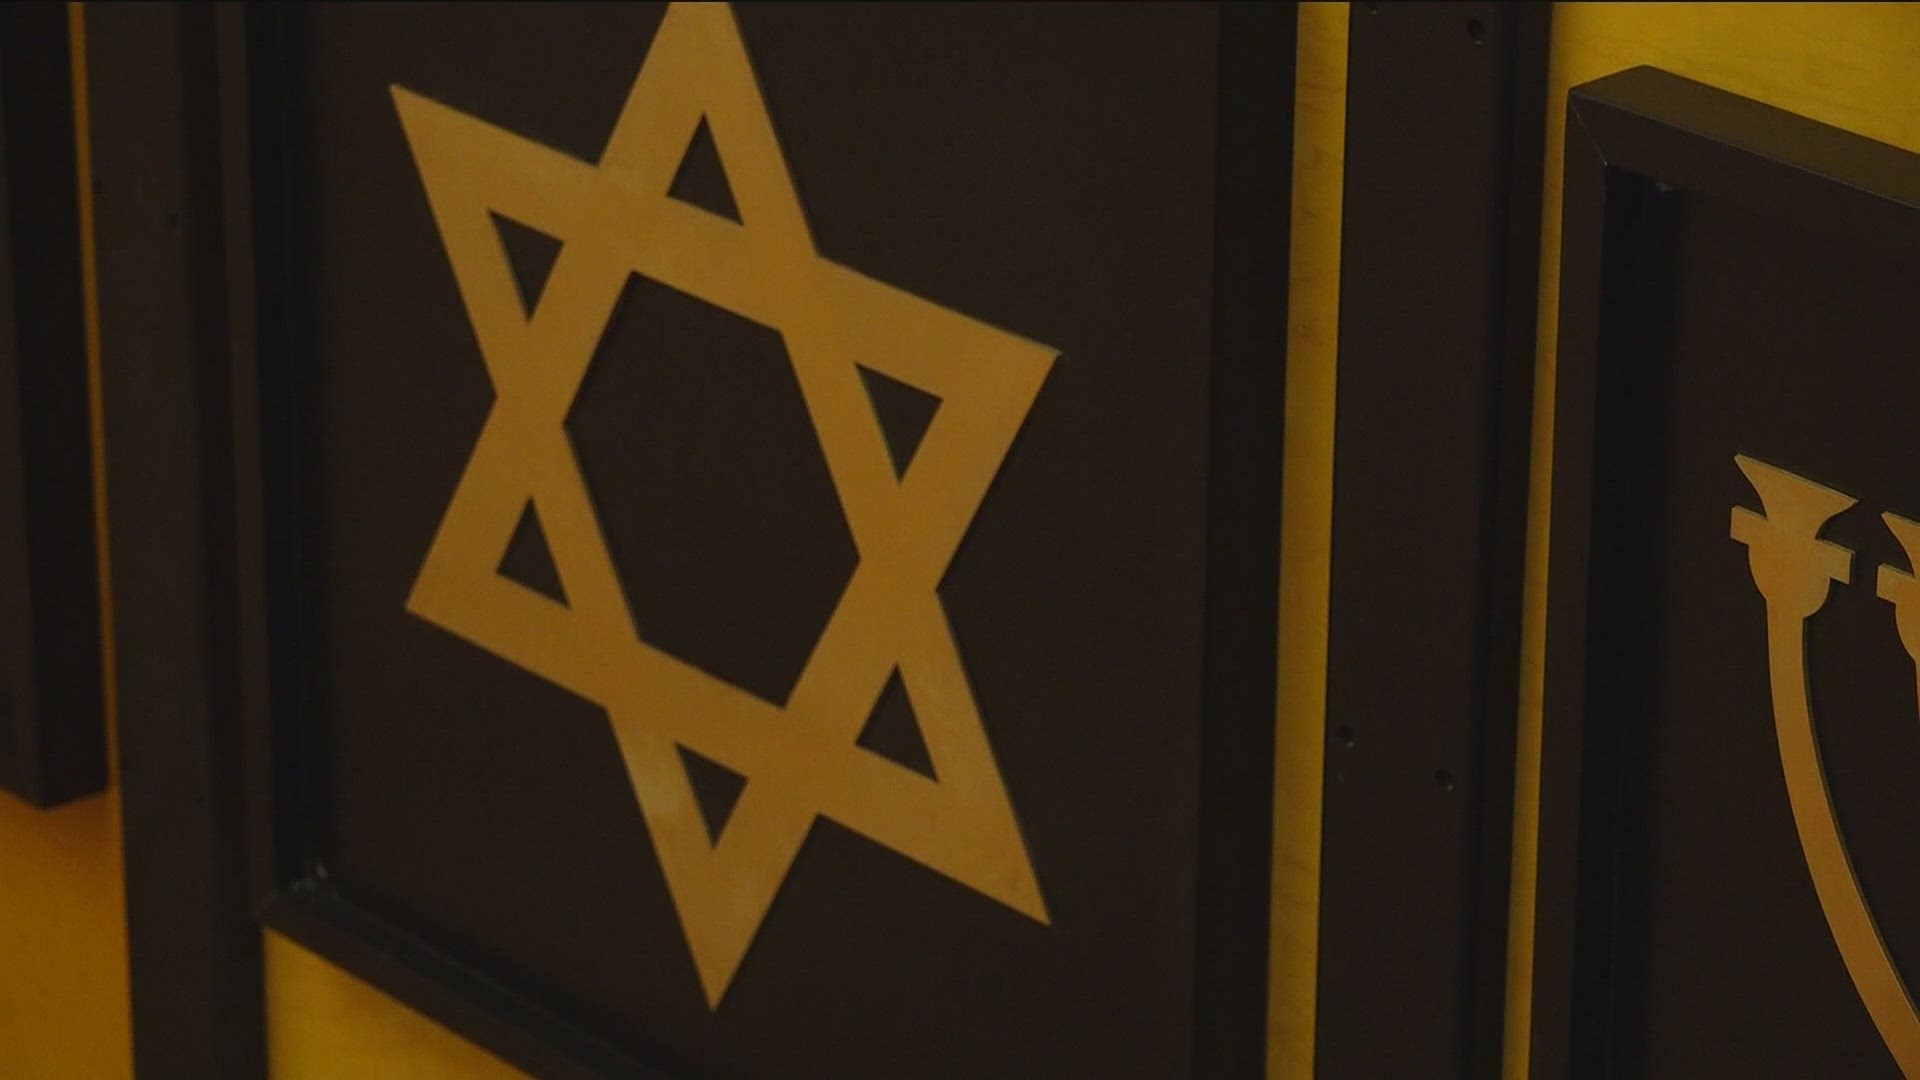 Rabbis say the Jewish New Year welcomes reflection.